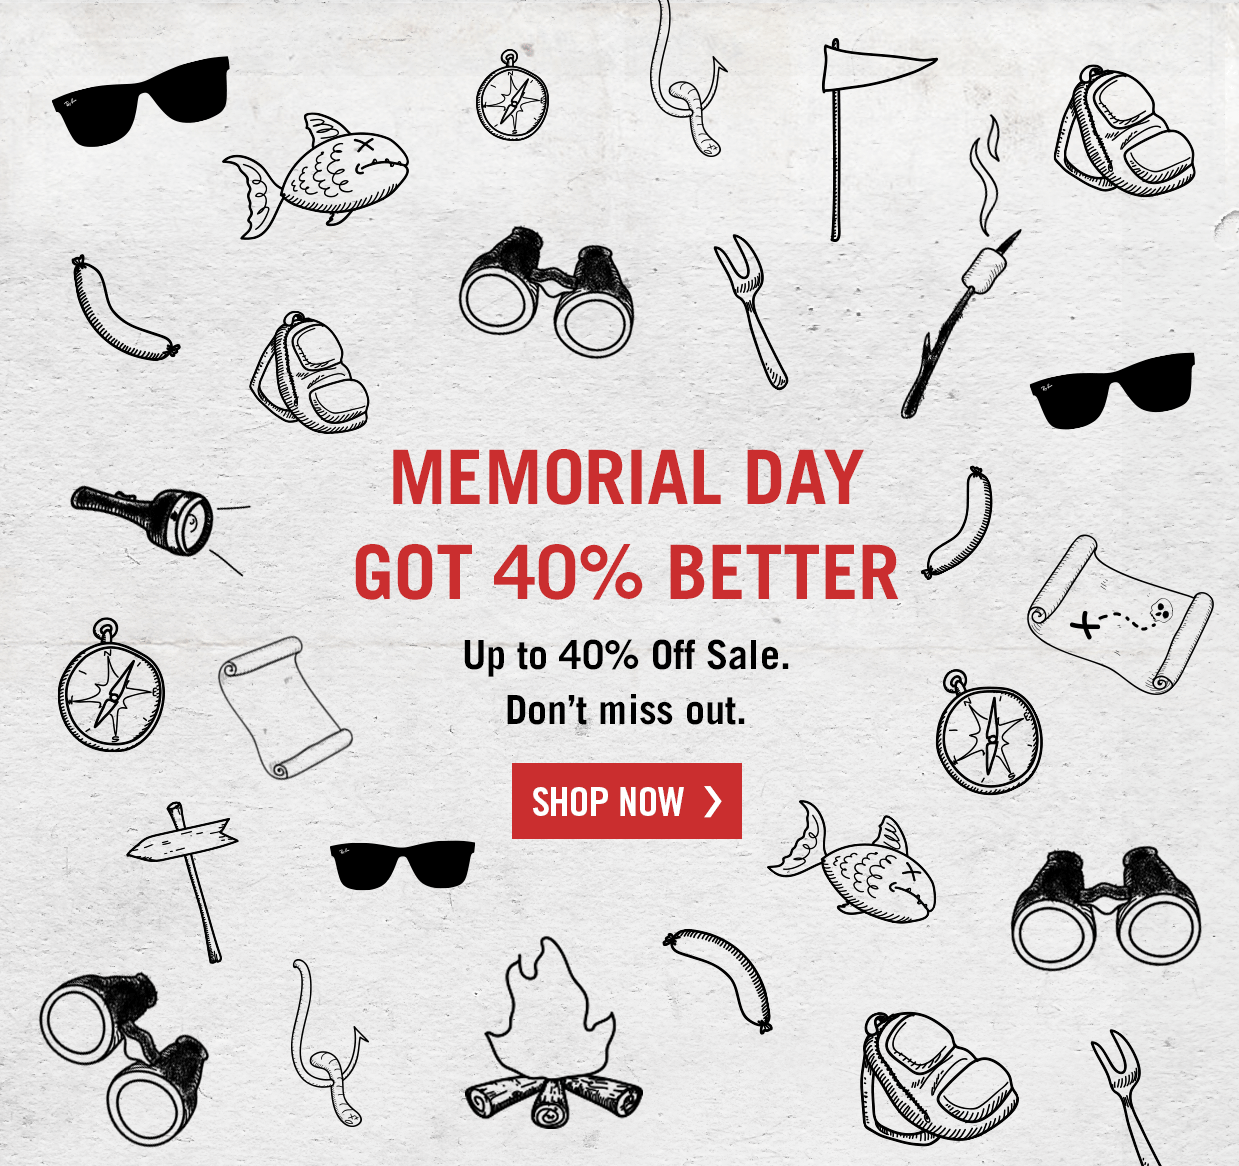 ray ban memorial day sale